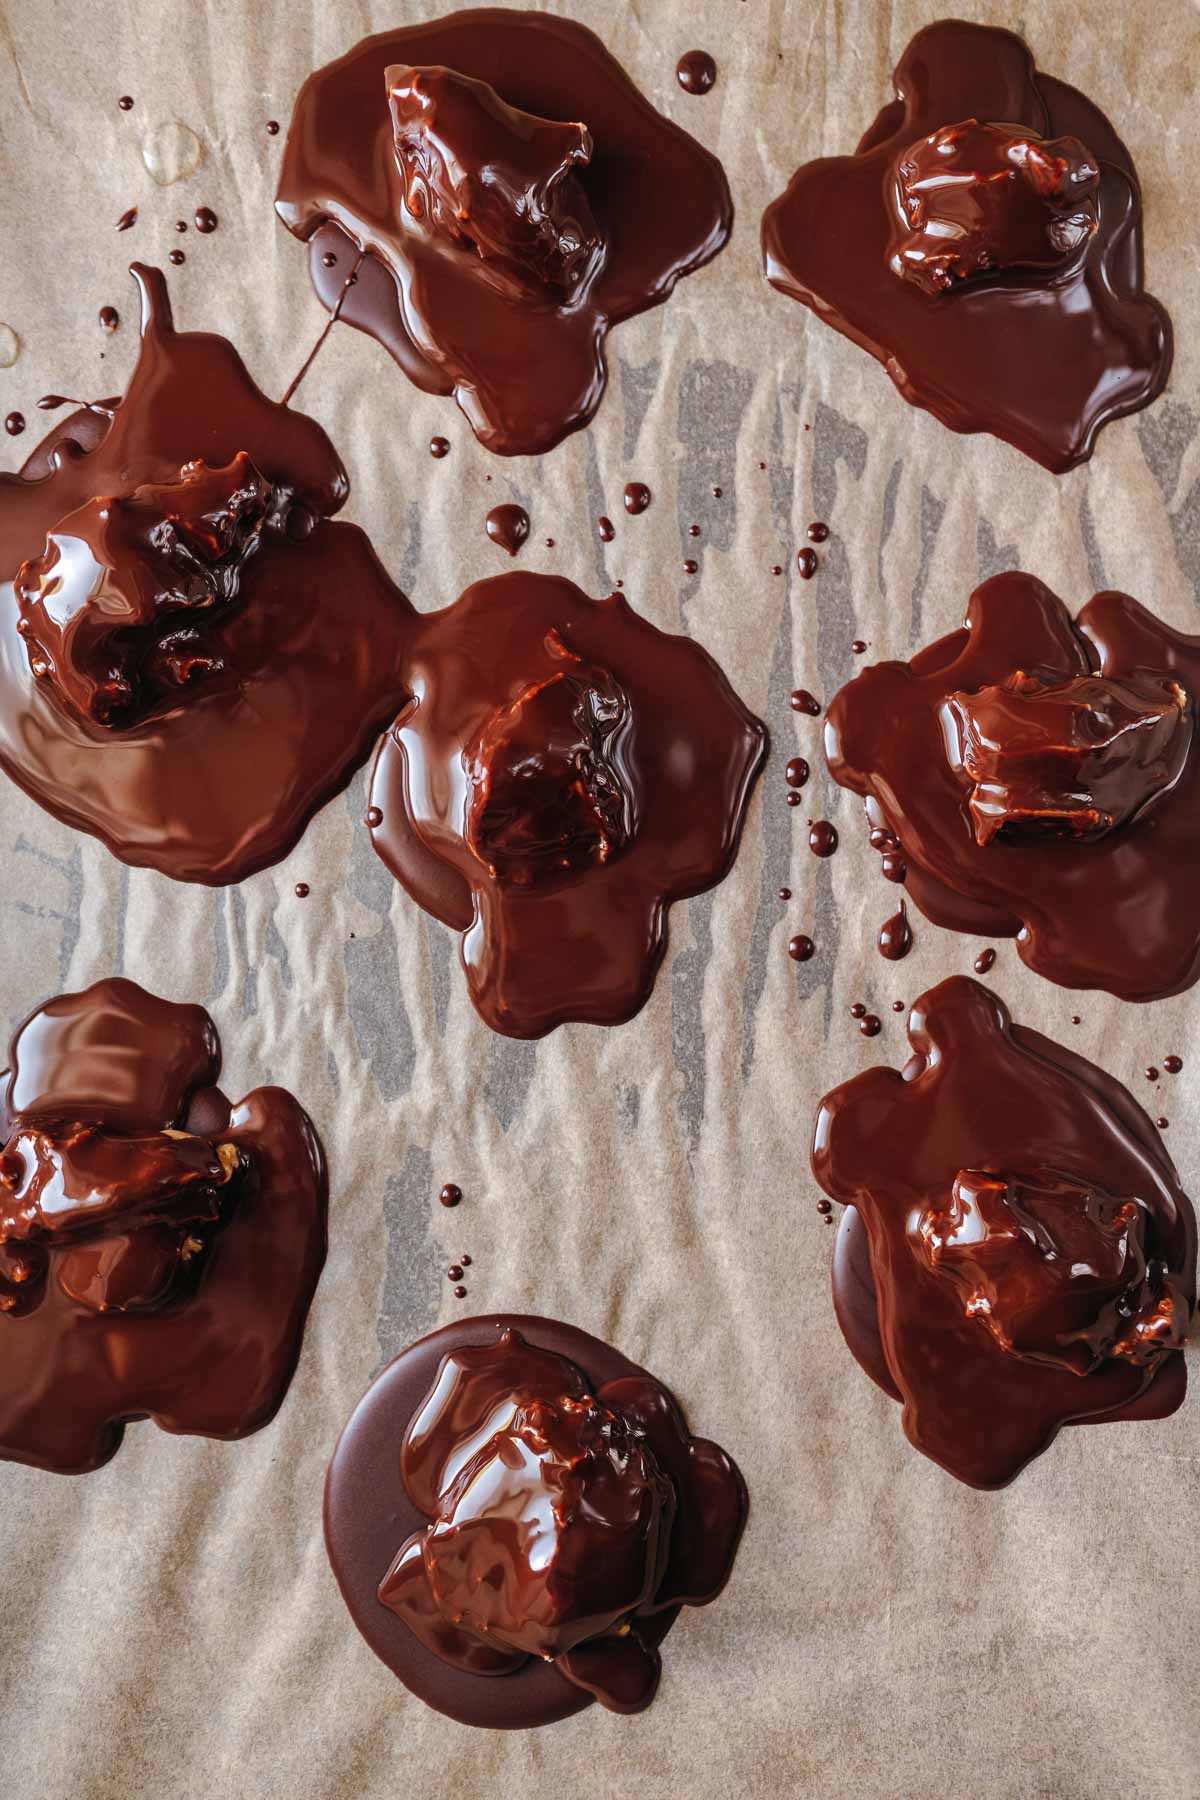 Melted puddles of chocolate on tan parchment paper.